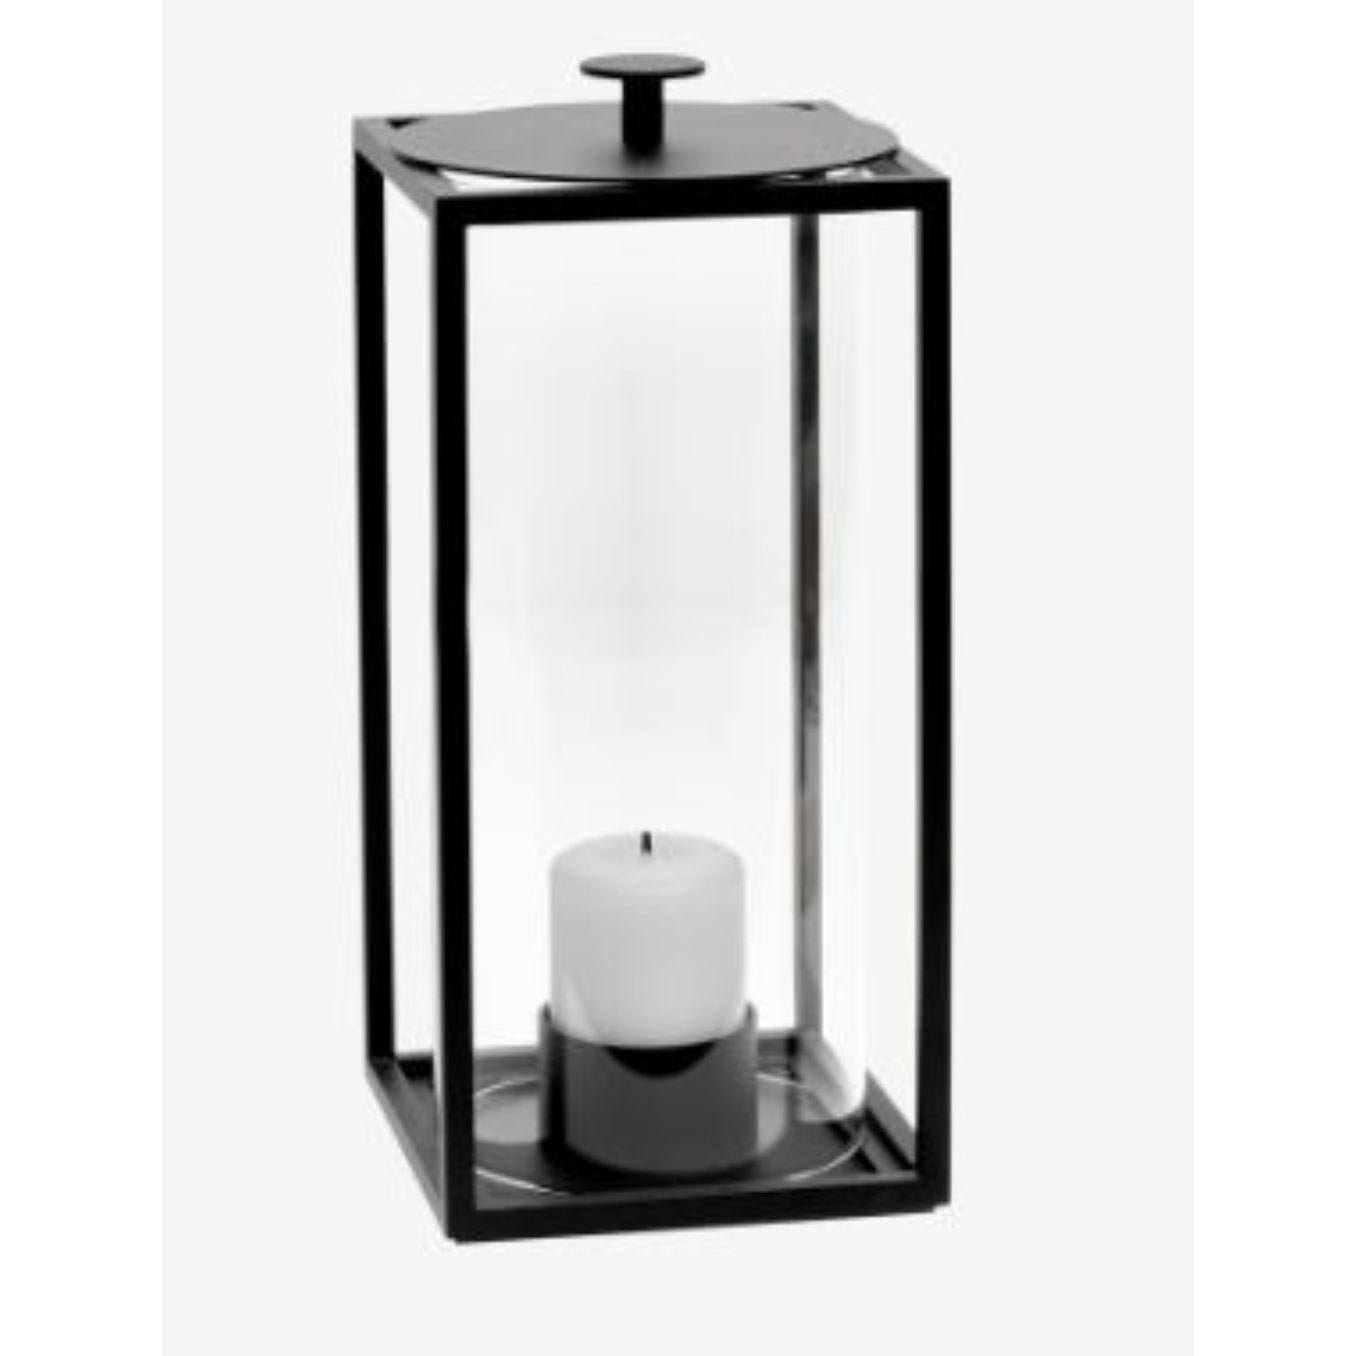 Small light’in lantern by Lassen
Dimensions: D 10 x W 10 x H 20 cm 
Materials: Metal 
Also available in different dimensions. 
Weight: 1.50 kg

With a sharp sense of contemporary Functionalist style, Mogens Lassen designed the iconic Kubus